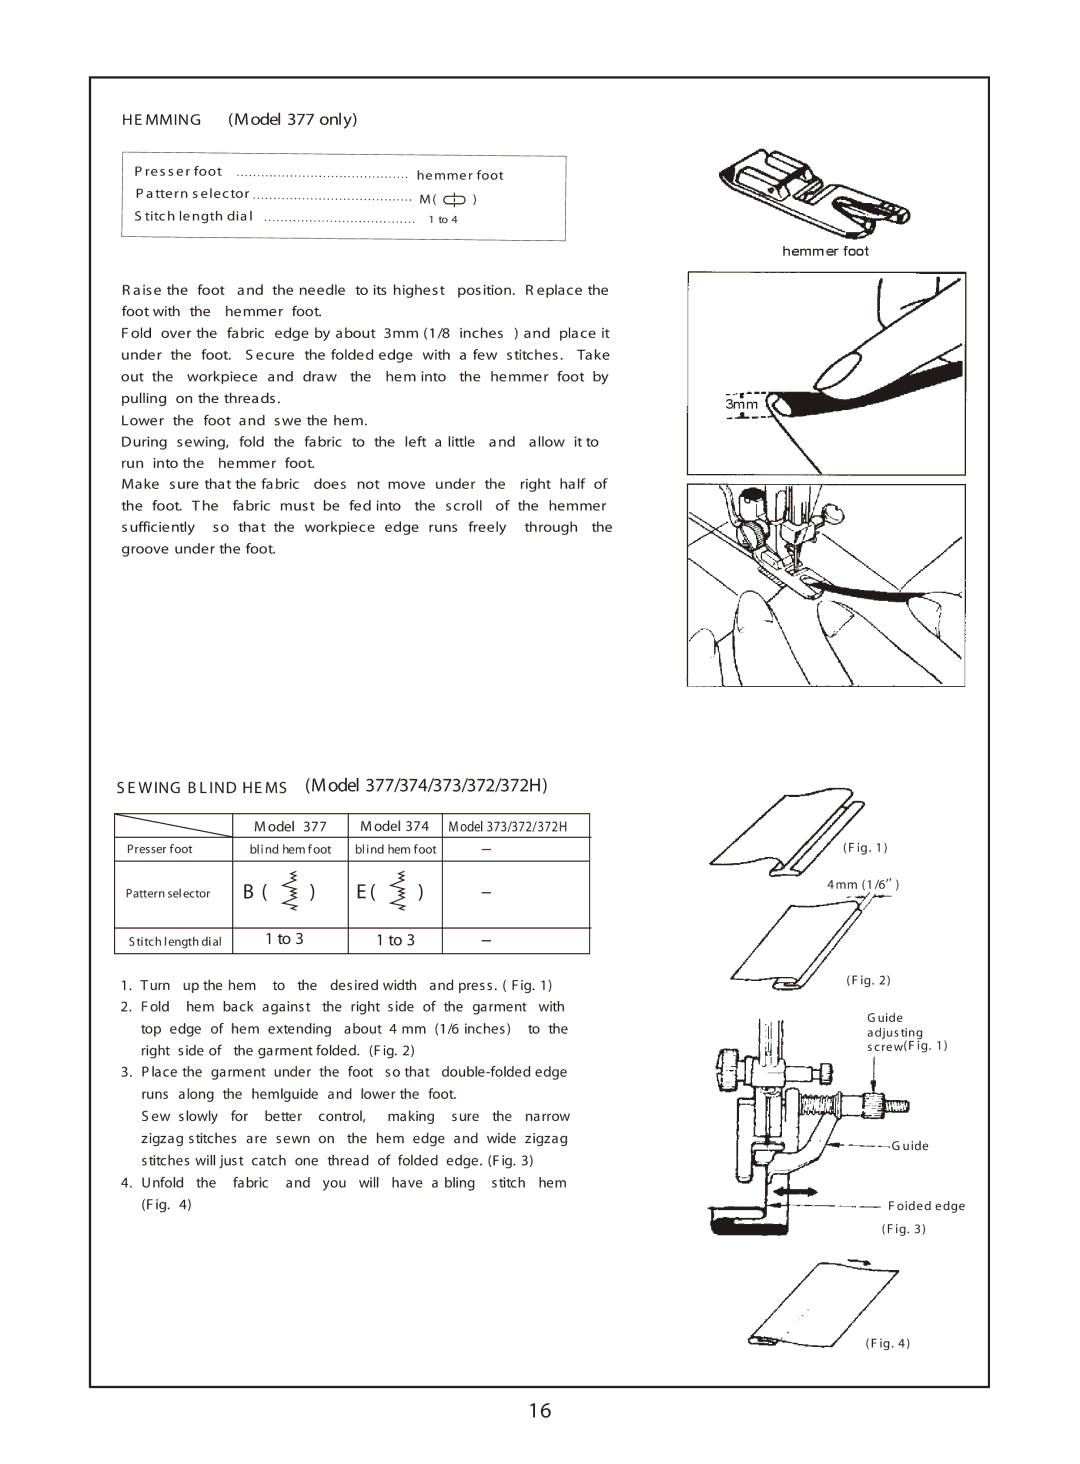 Euro-Pro instruction manual Wing B L IND HE MS Model 377/374/373/372/372H, HE Mming Model 377 only 